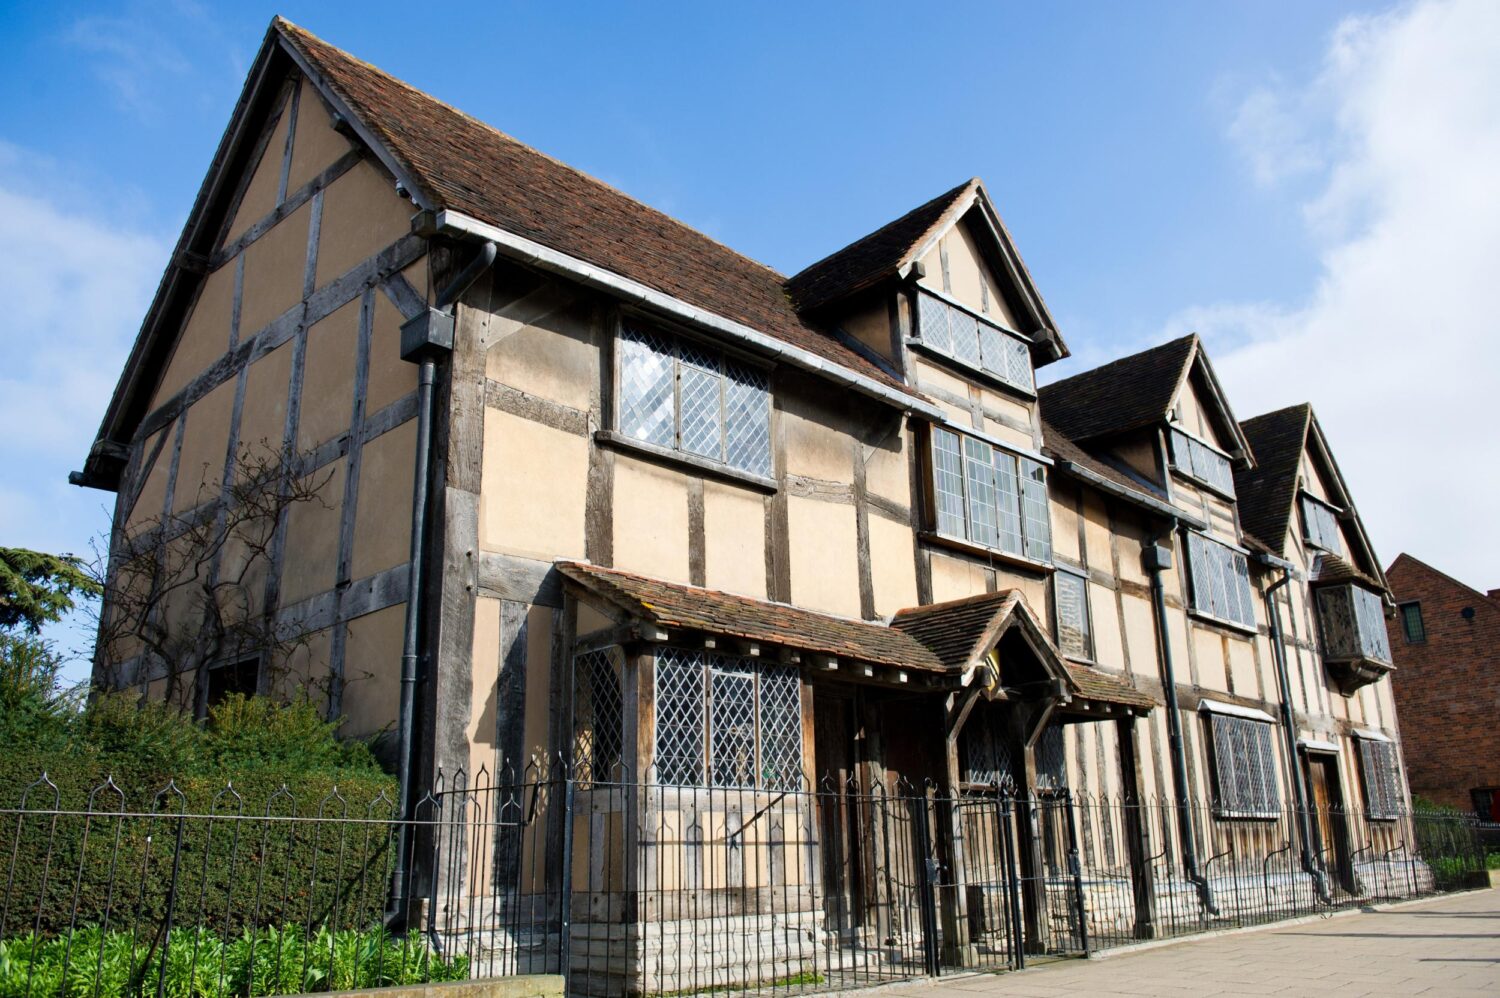 United Kingdom: Following in Shakespeare’s Footsteps Around London